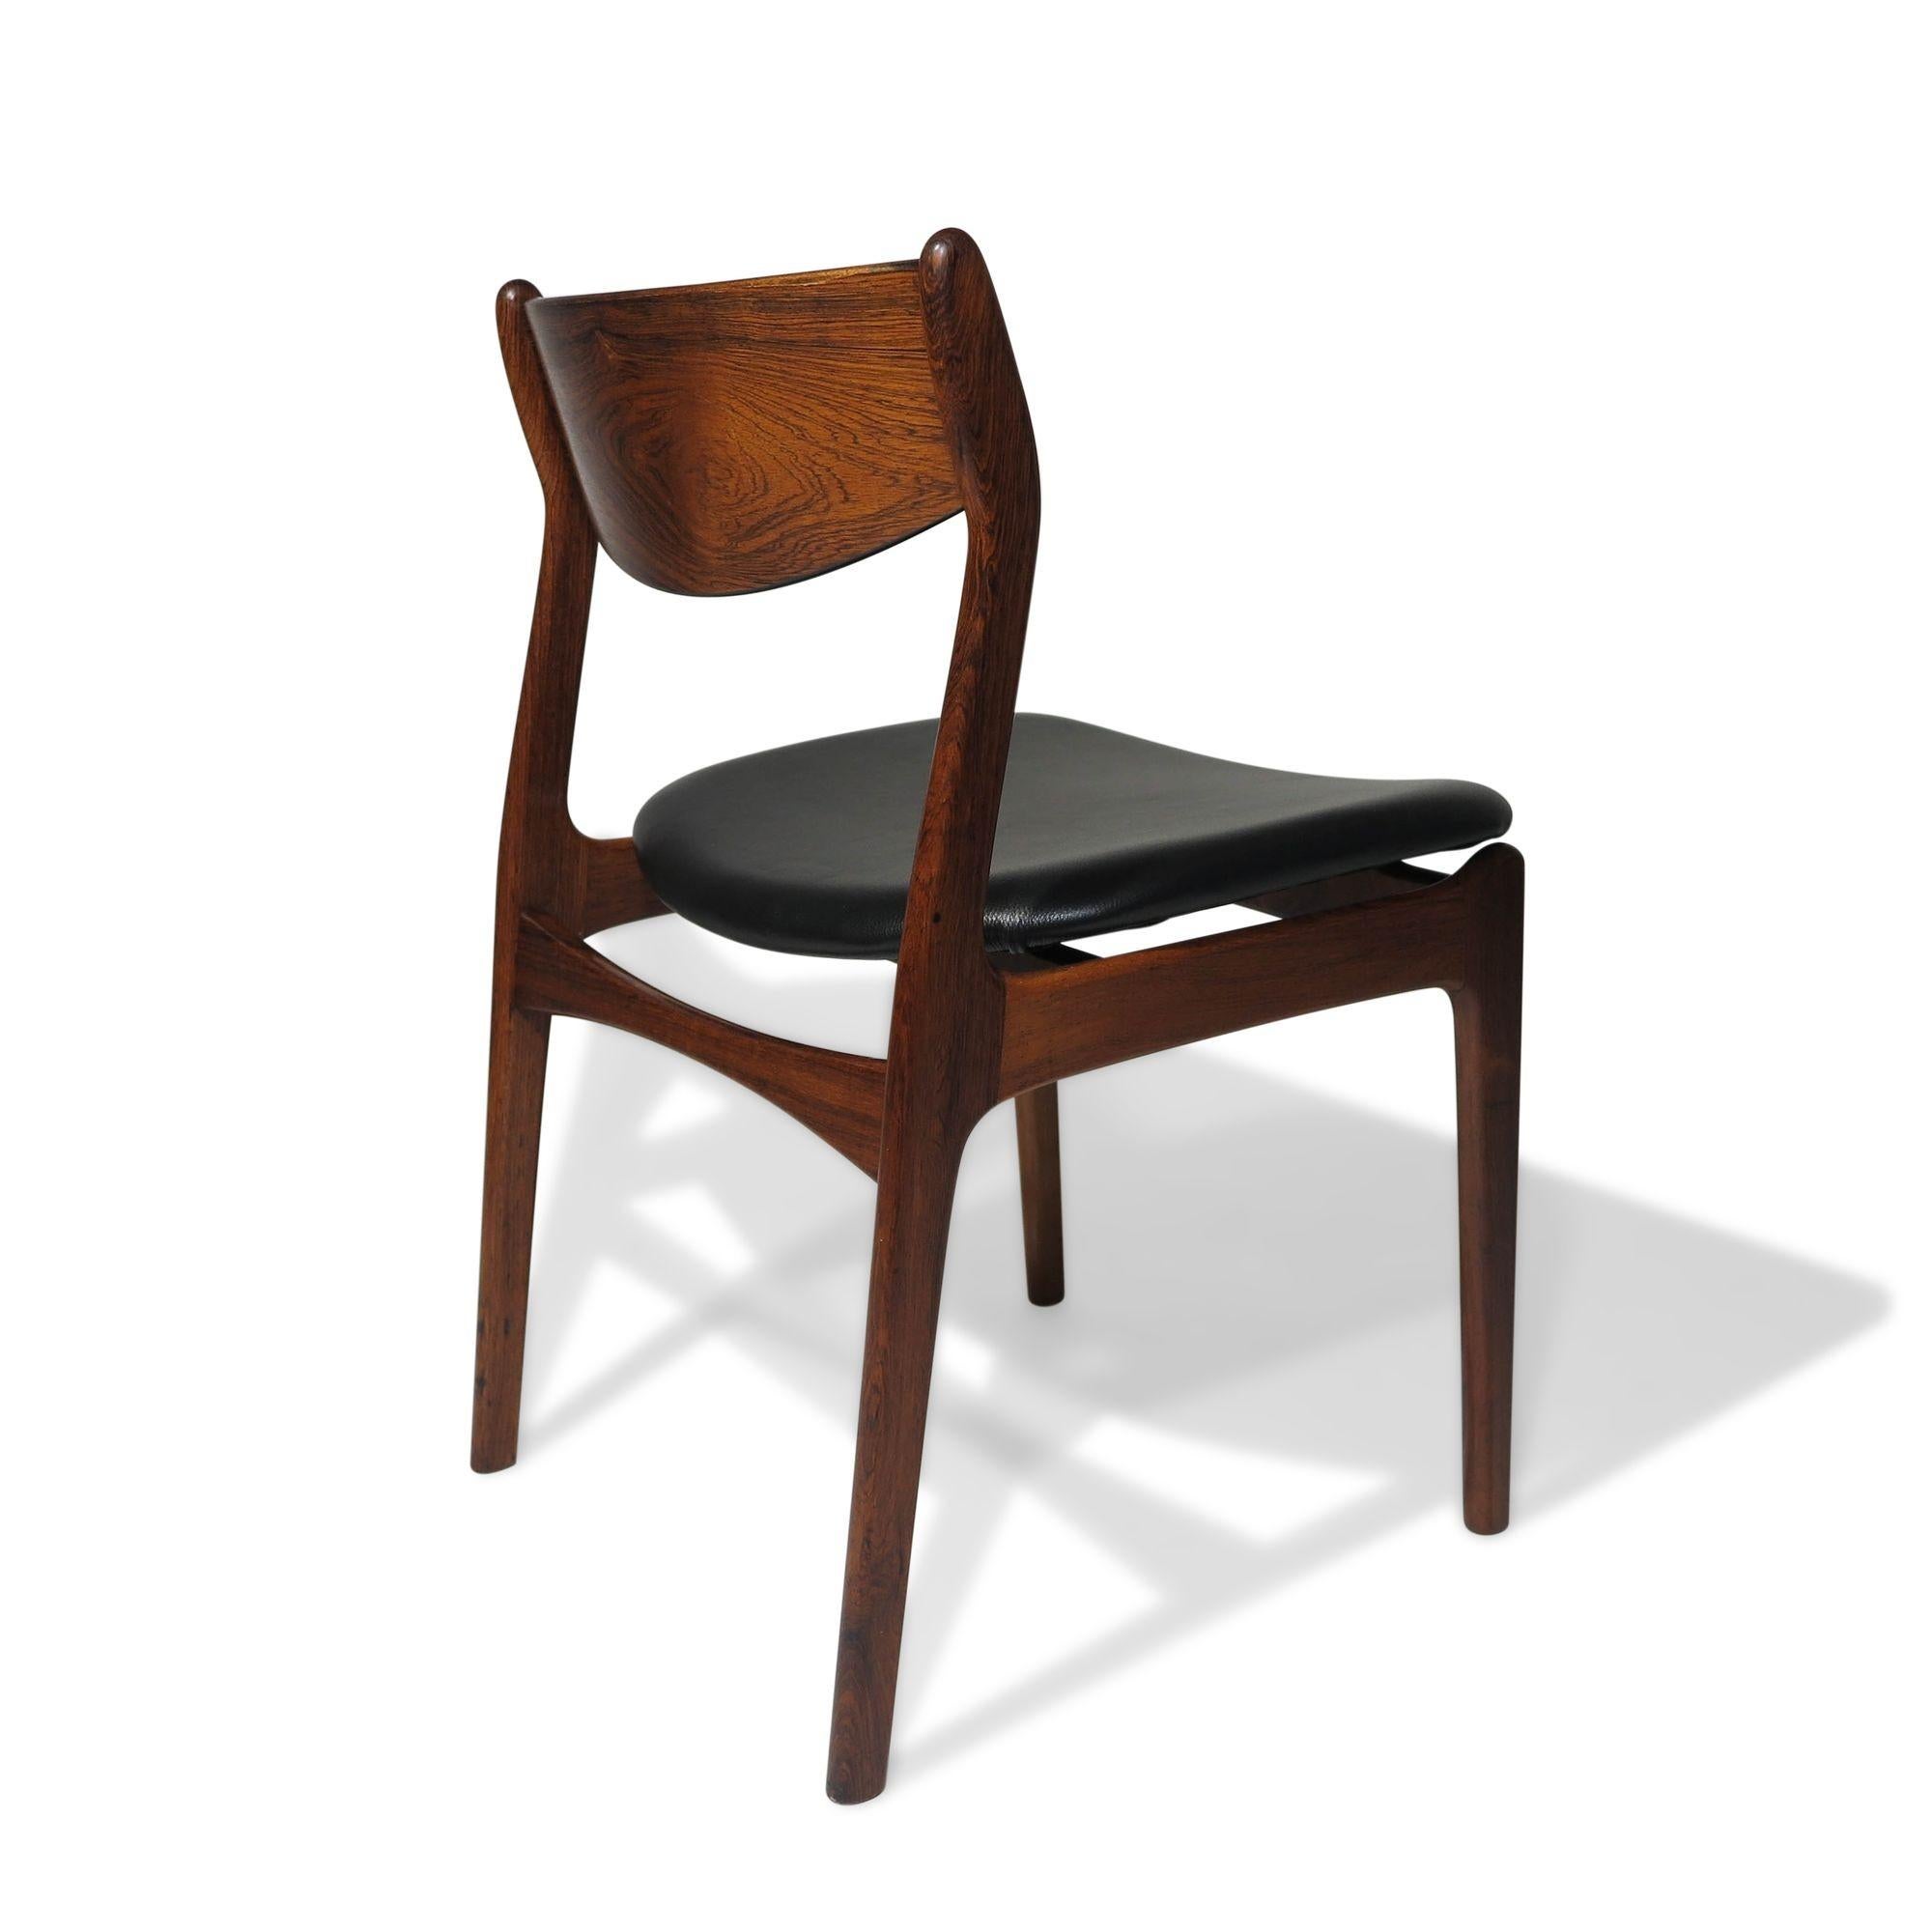 12 Brazilian Rosewood Pe Jorgensen Dining Chairs in New Black Leather 1